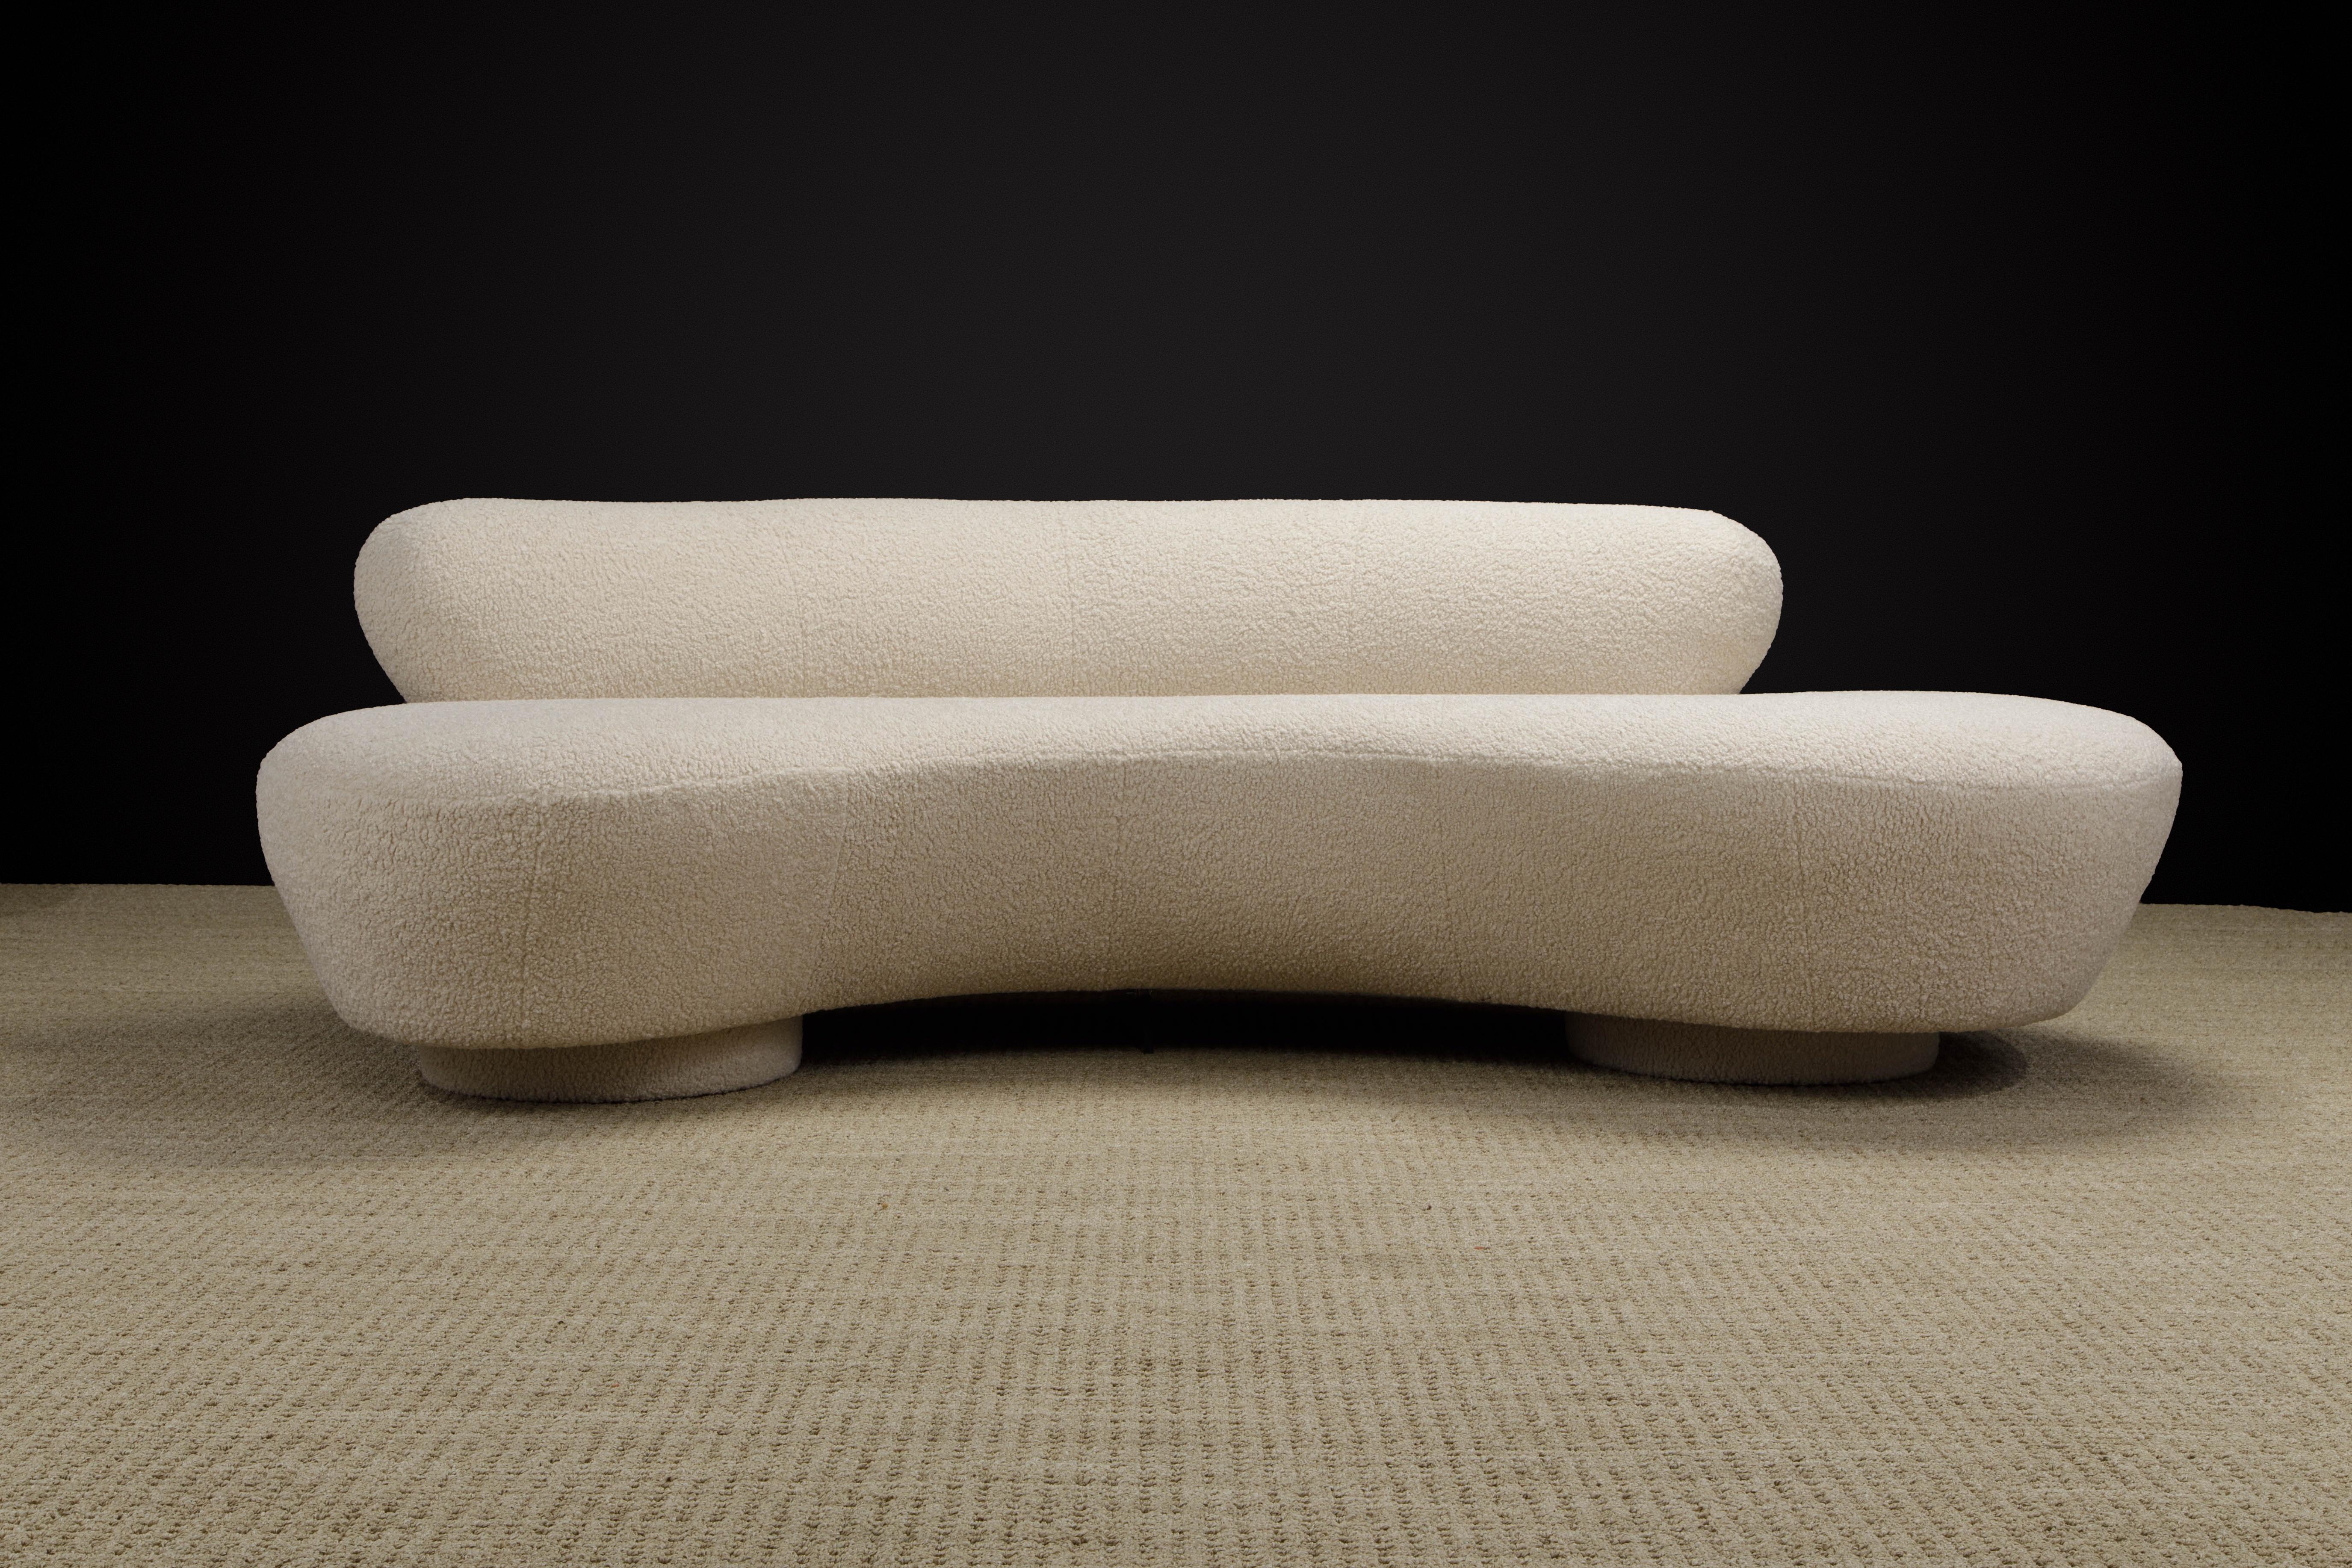 Vladimir Kagan for Directional 'Cloud' Sofas in New Nubby Bouclé, c 1980, Signed 4